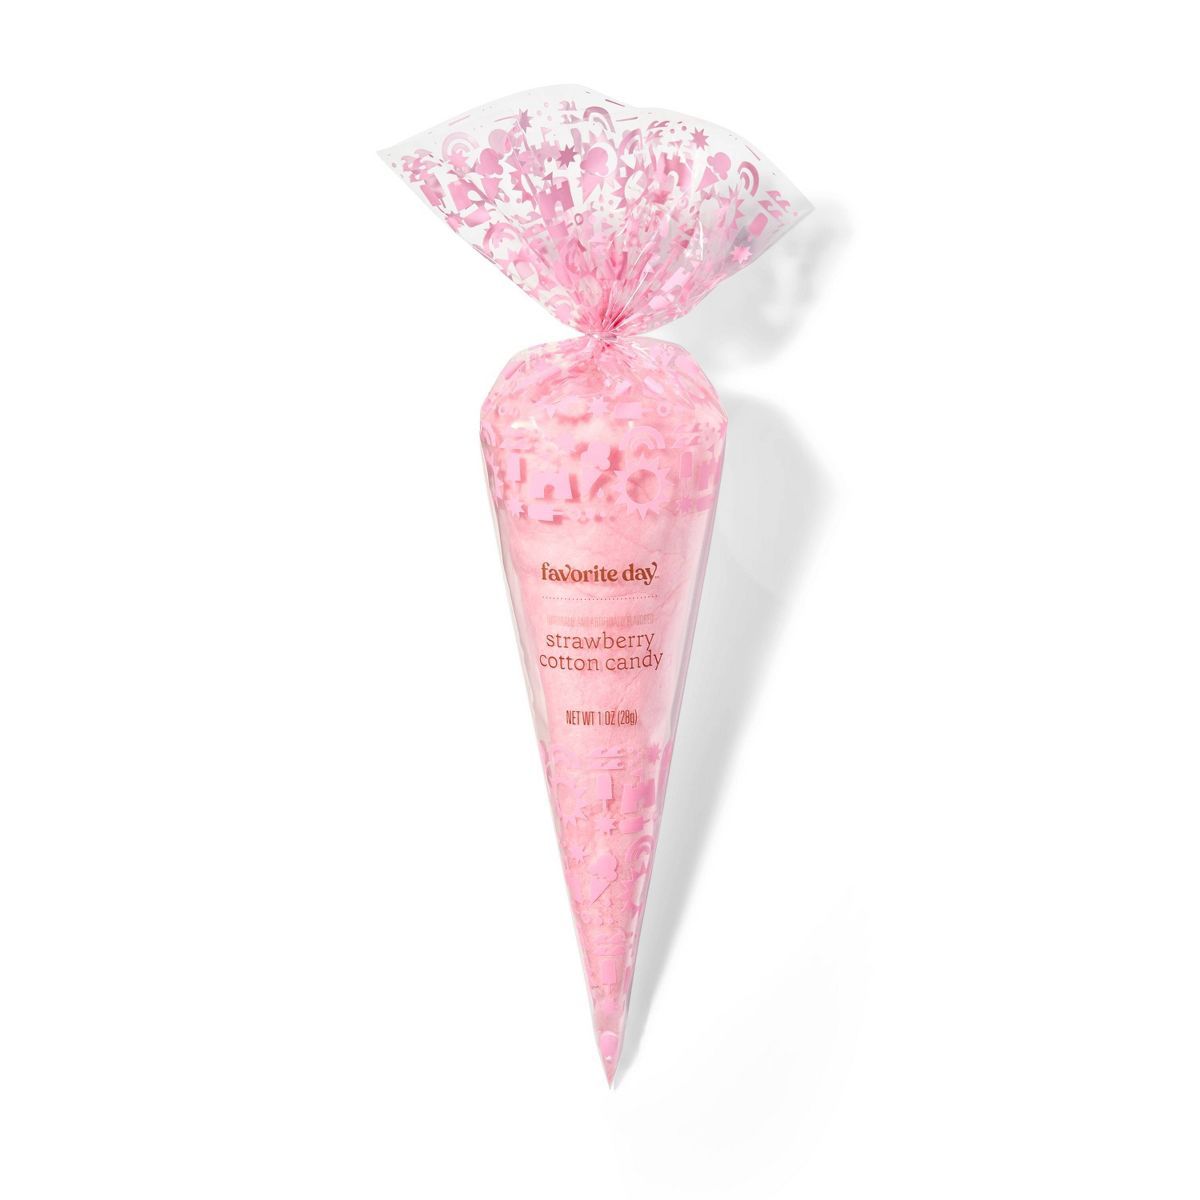 Strawberry Cotton Candy Cone - 1oz - Favorite Day™ | Target